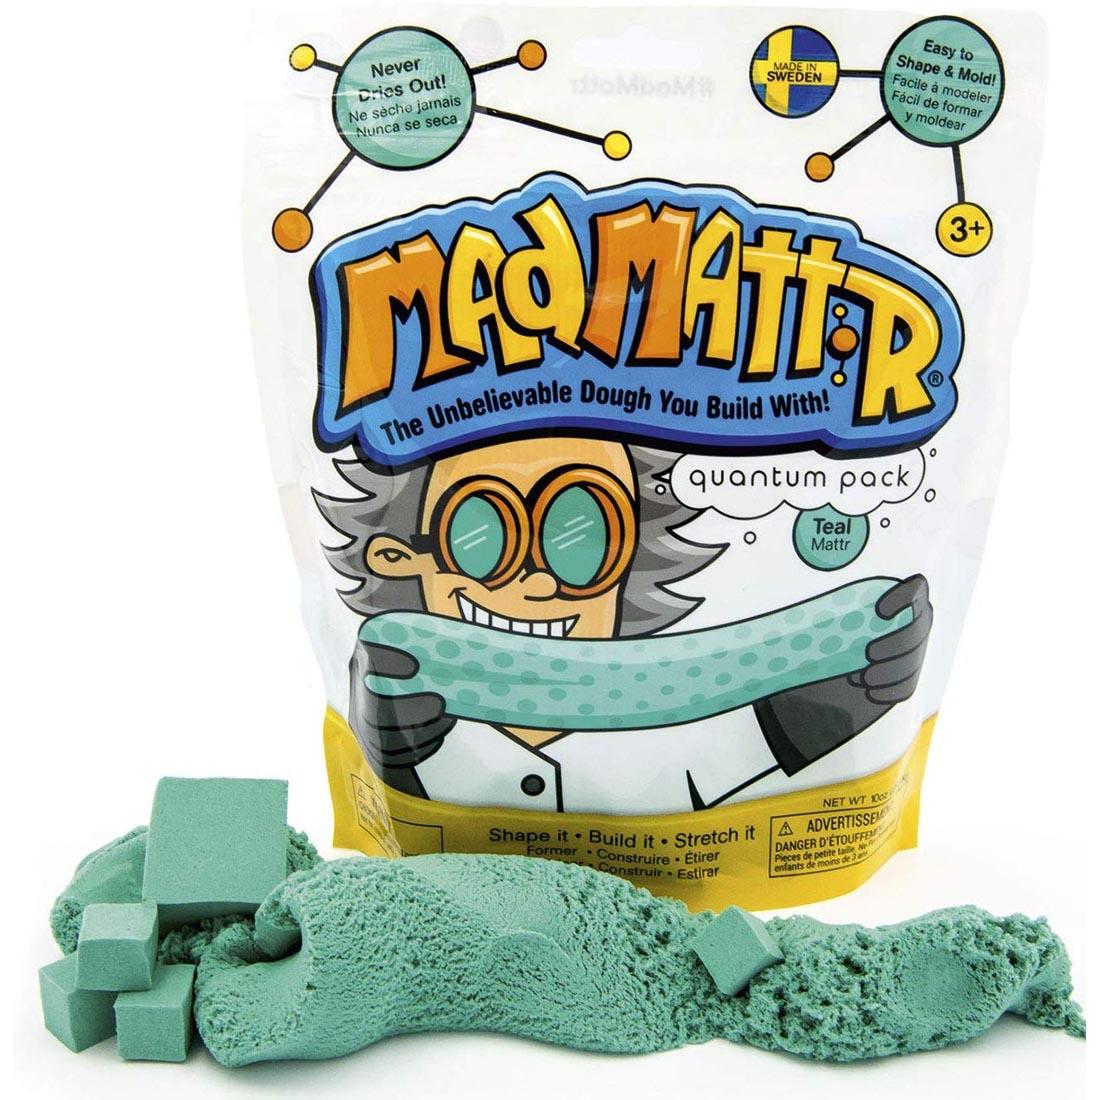 Mad Mattr Quantum Pack in teal, with some outside the package